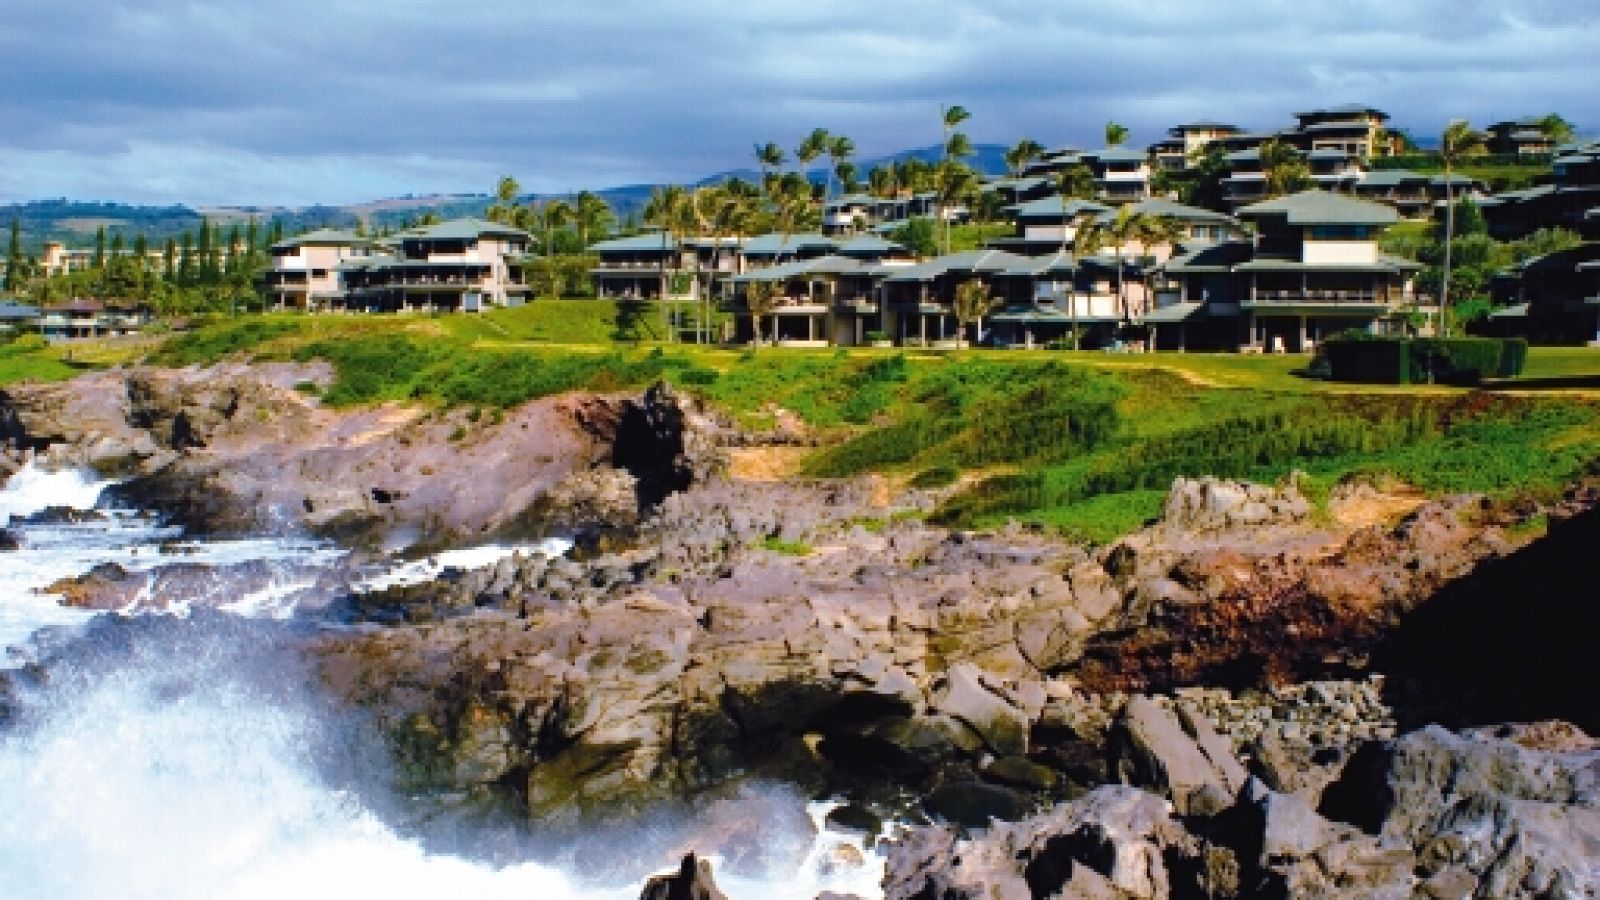 Kapalua Villas on the north shore of Maui should be experienced once